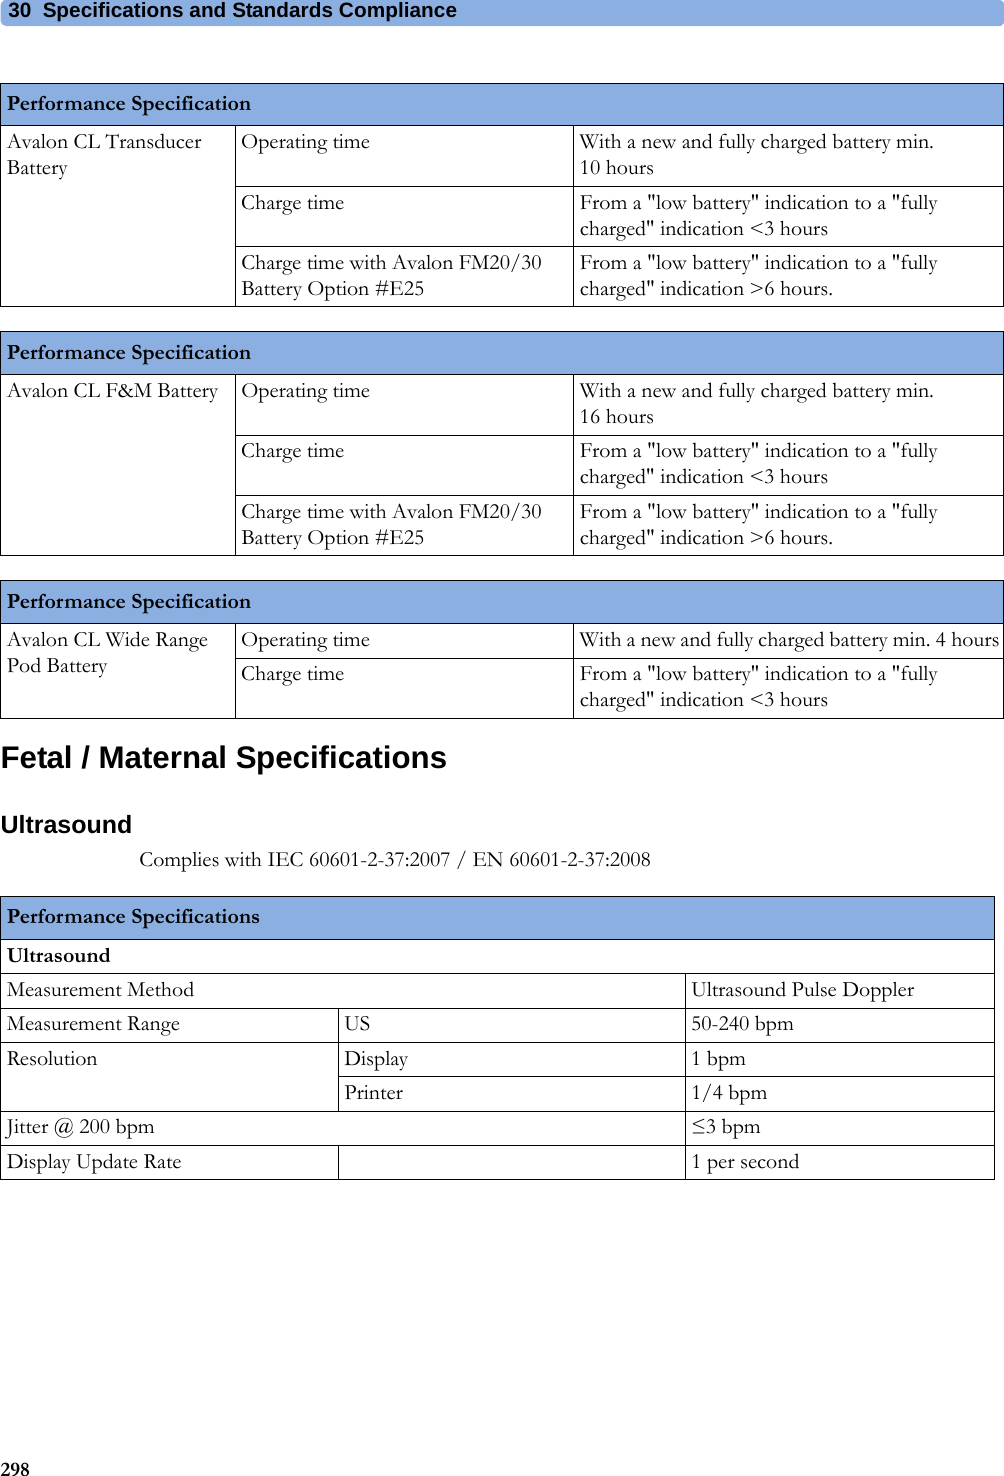 30  Specifications and Standards Compliance298Fetal / Maternal SpecificationsUltrasoundComplies with IEC 60601-2-37:2007 / EN 60601-2-37:2008Performance SpecificationAvalon CL Transducer BatteryOperating time With a new and fully charged battery min. 10 hoursCharge time From a &quot;low battery&quot; indication to a &quot;fully charged&quot; indication &lt;3 hoursCharge time with Avalon FM20/30 Battery Option #E25From a &quot;low battery&quot; indication to a &quot;fully charged&quot; indication &gt;6 hours.Performance SpecificationAvalon CL F&amp;M Battery Operating time With a new and fully charged battery min. 16 hoursCharge time From a &quot;low battery&quot; indication to a &quot;fully charged&quot; indication &lt;3 hoursCharge time with Avalon FM20/30 Battery Option #E25From a &quot;low battery&quot; indication to a &quot;fully charged&quot; indication &gt;6 hours.Performance SpecificationAvalon CL Wide Range Pod BatteryOperating time With a new and fully charged battery min. 4 hoursCharge time From a &quot;low battery&quot; indication to a &quot;fully charged&quot; indication &lt;3 hoursPerformance SpecificationsUltrasoundMeasurement Method Ultrasound Pulse DopplerMeasurement Range US 50-240 bpmResolution Display 1 bpmPrinter 1/4 bpmJitter @ 200 bpm ≤3 bpmDisplay Update Rate 1 per second